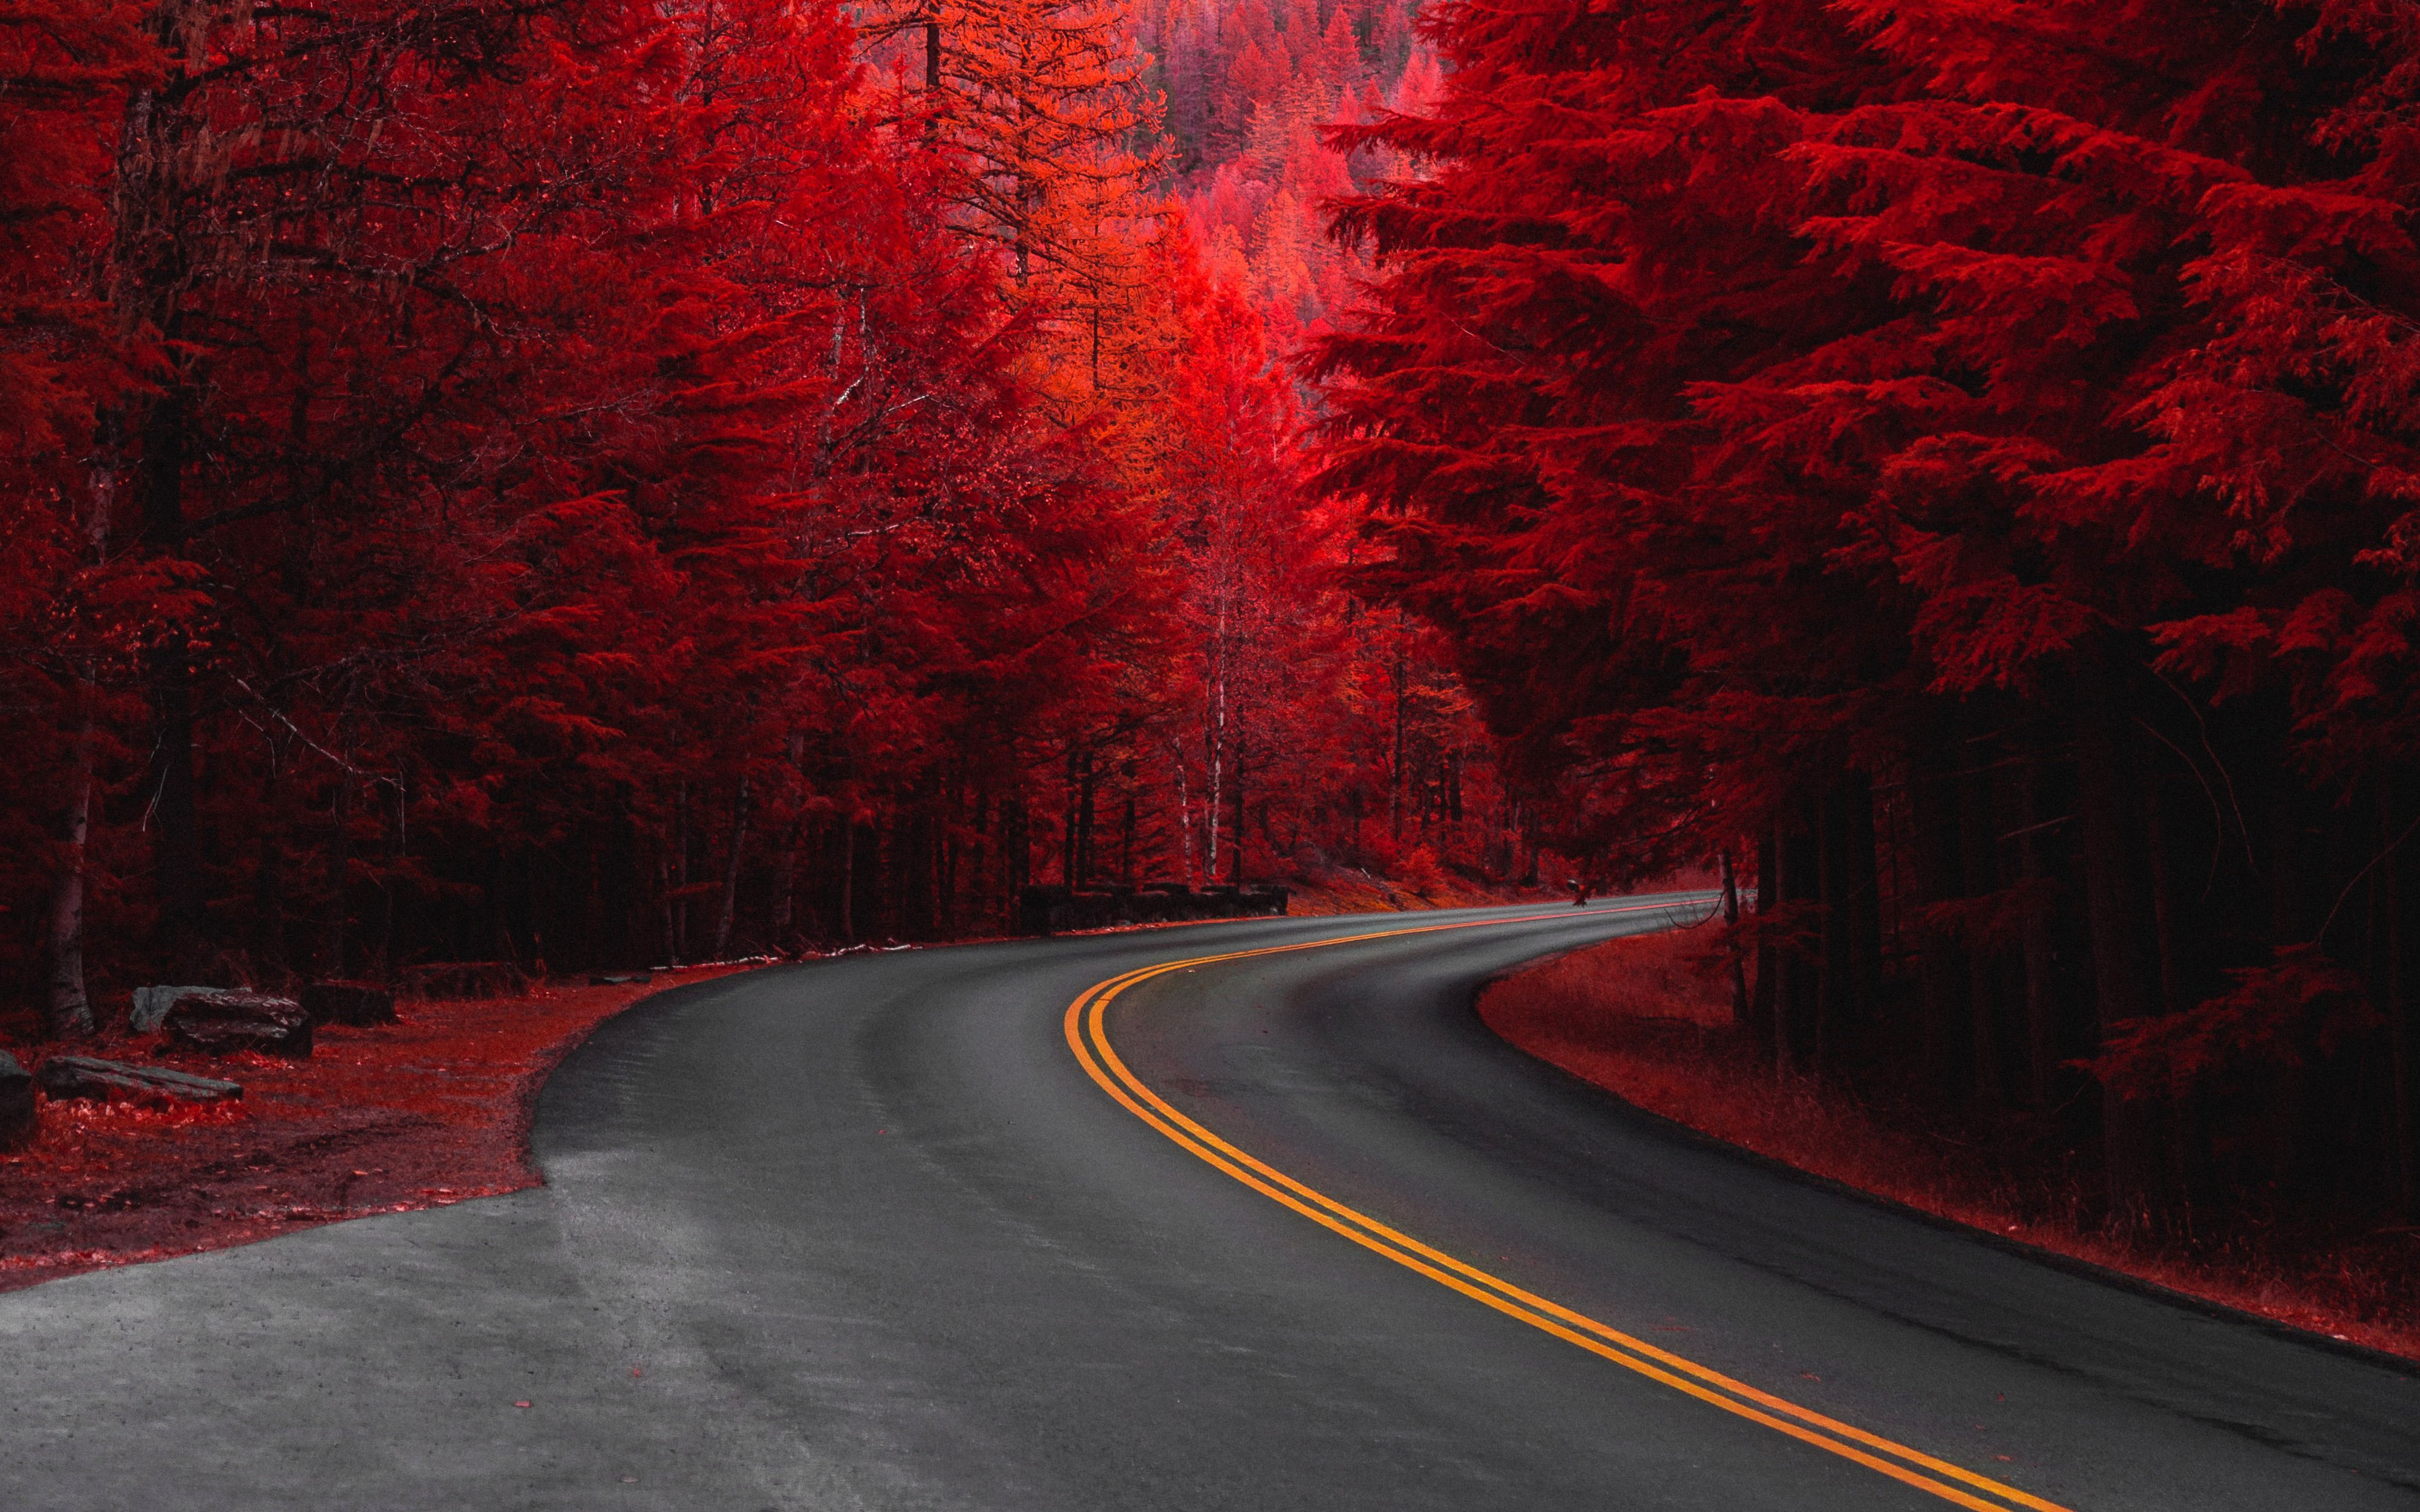 Free photo A country road through an autumn forest with red leaves